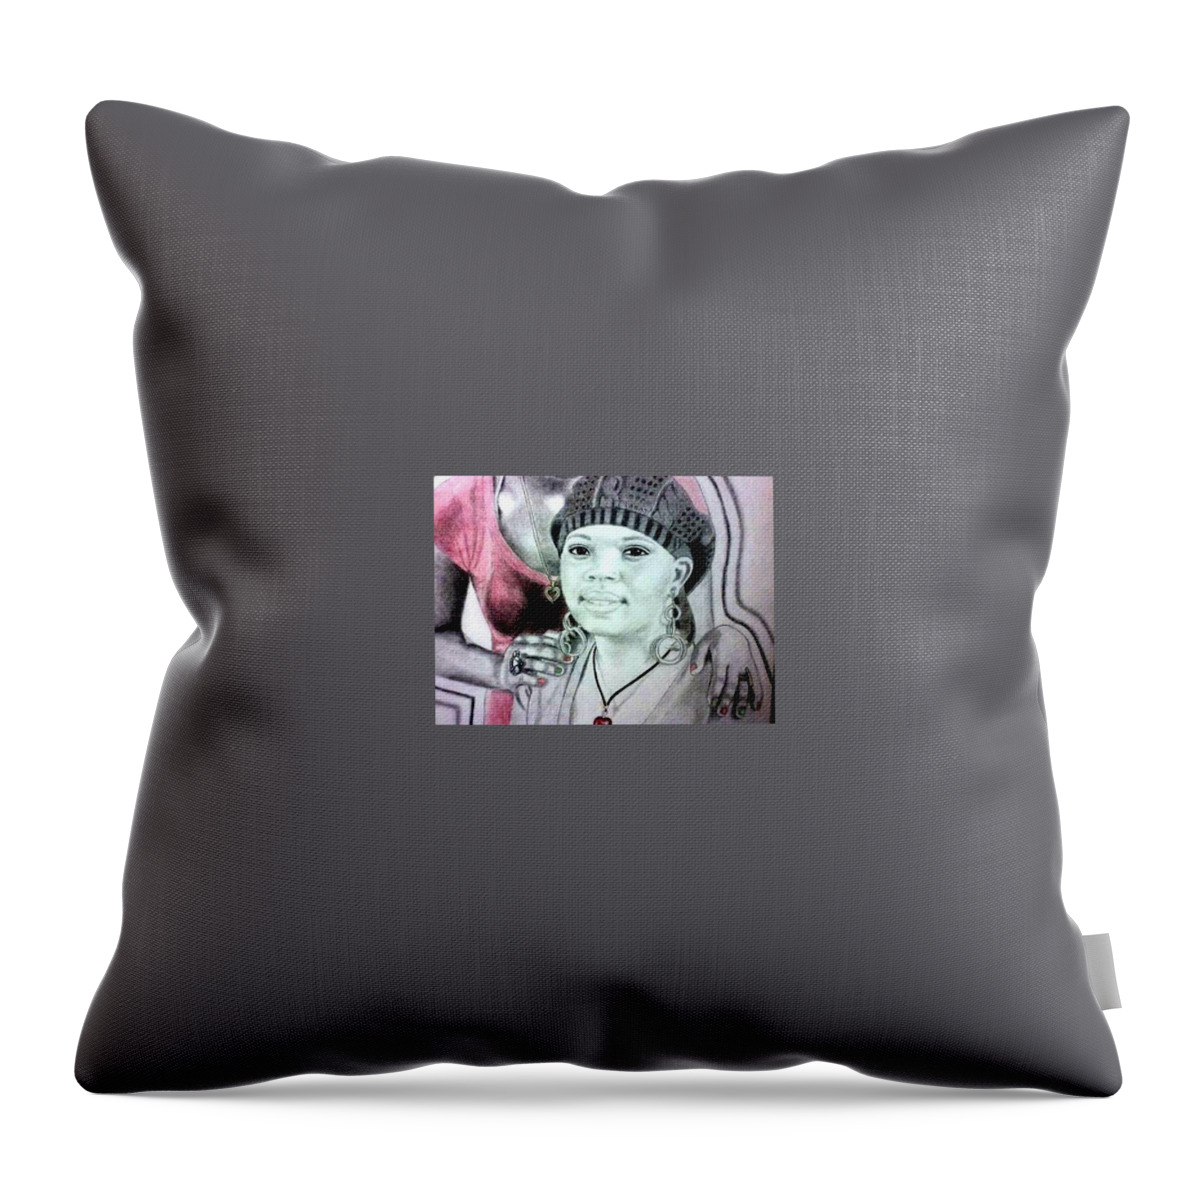 Black Art Throw Pillow featuring the drawing Untitled 4 by Maru 